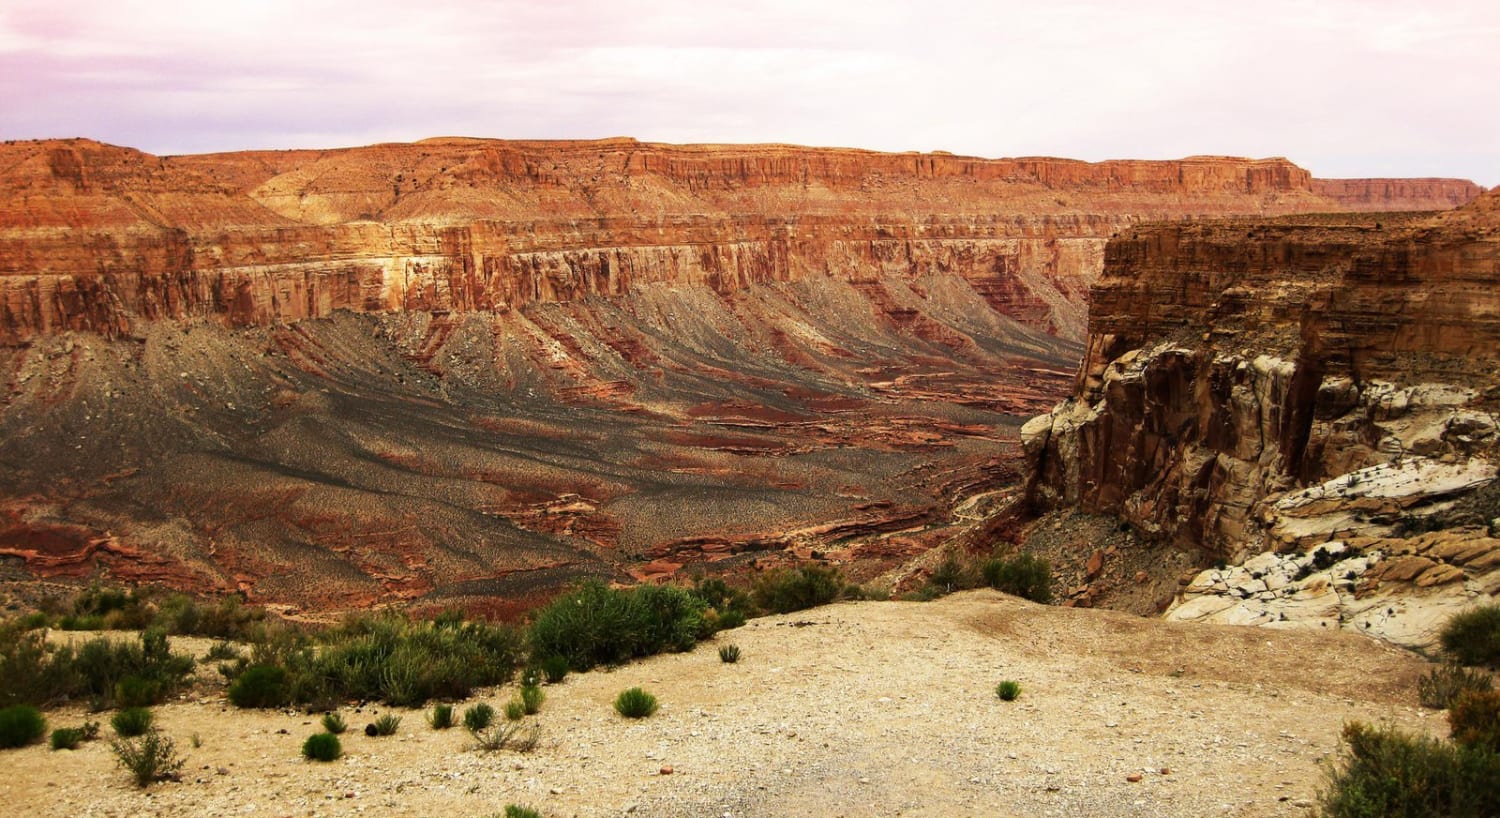 Visit the Only Village Inside the Grand Canyon